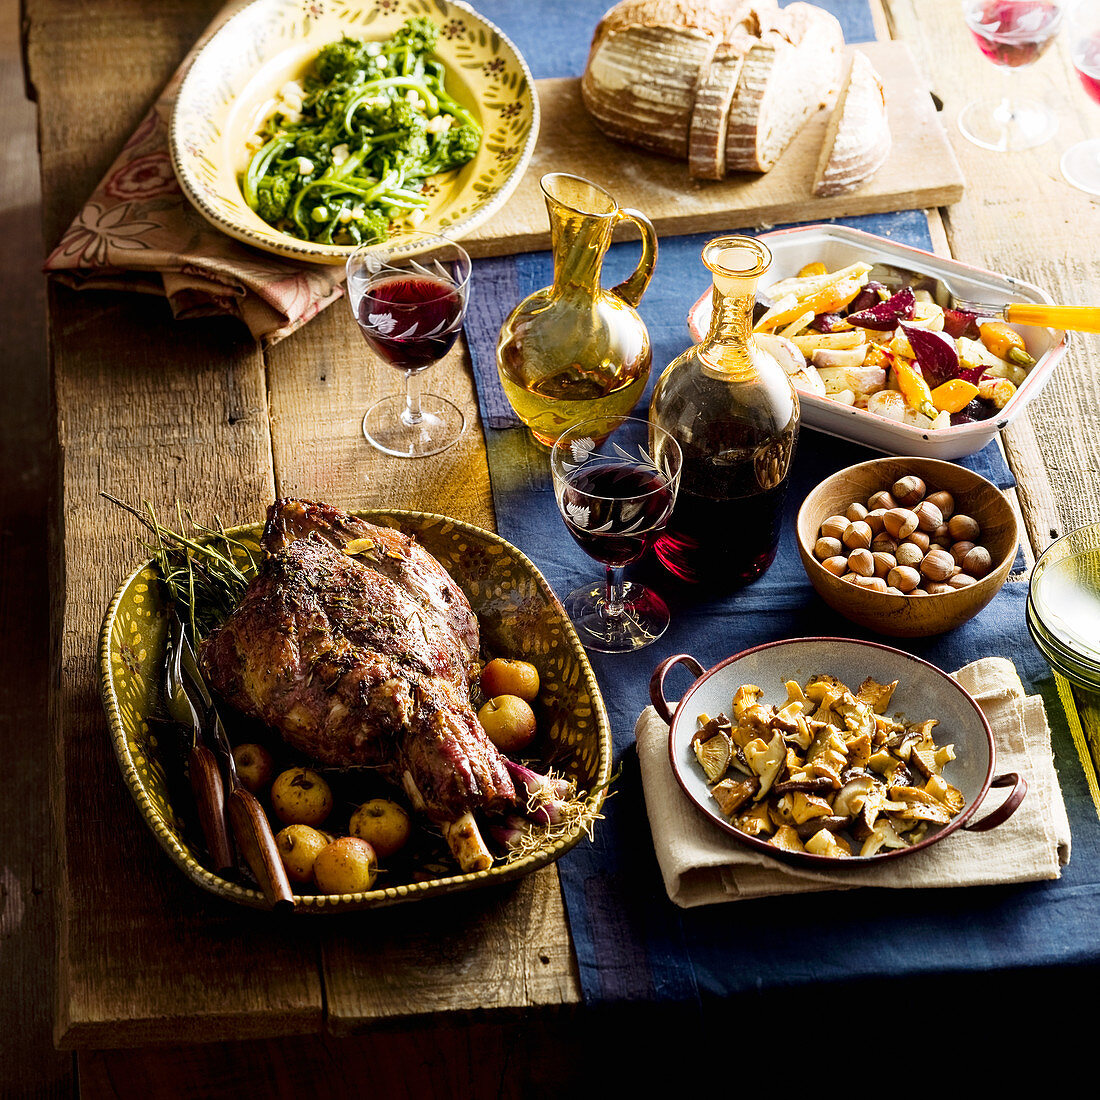 A table laid with a roasted leg of lamb, mushrooms, vegetables and wine